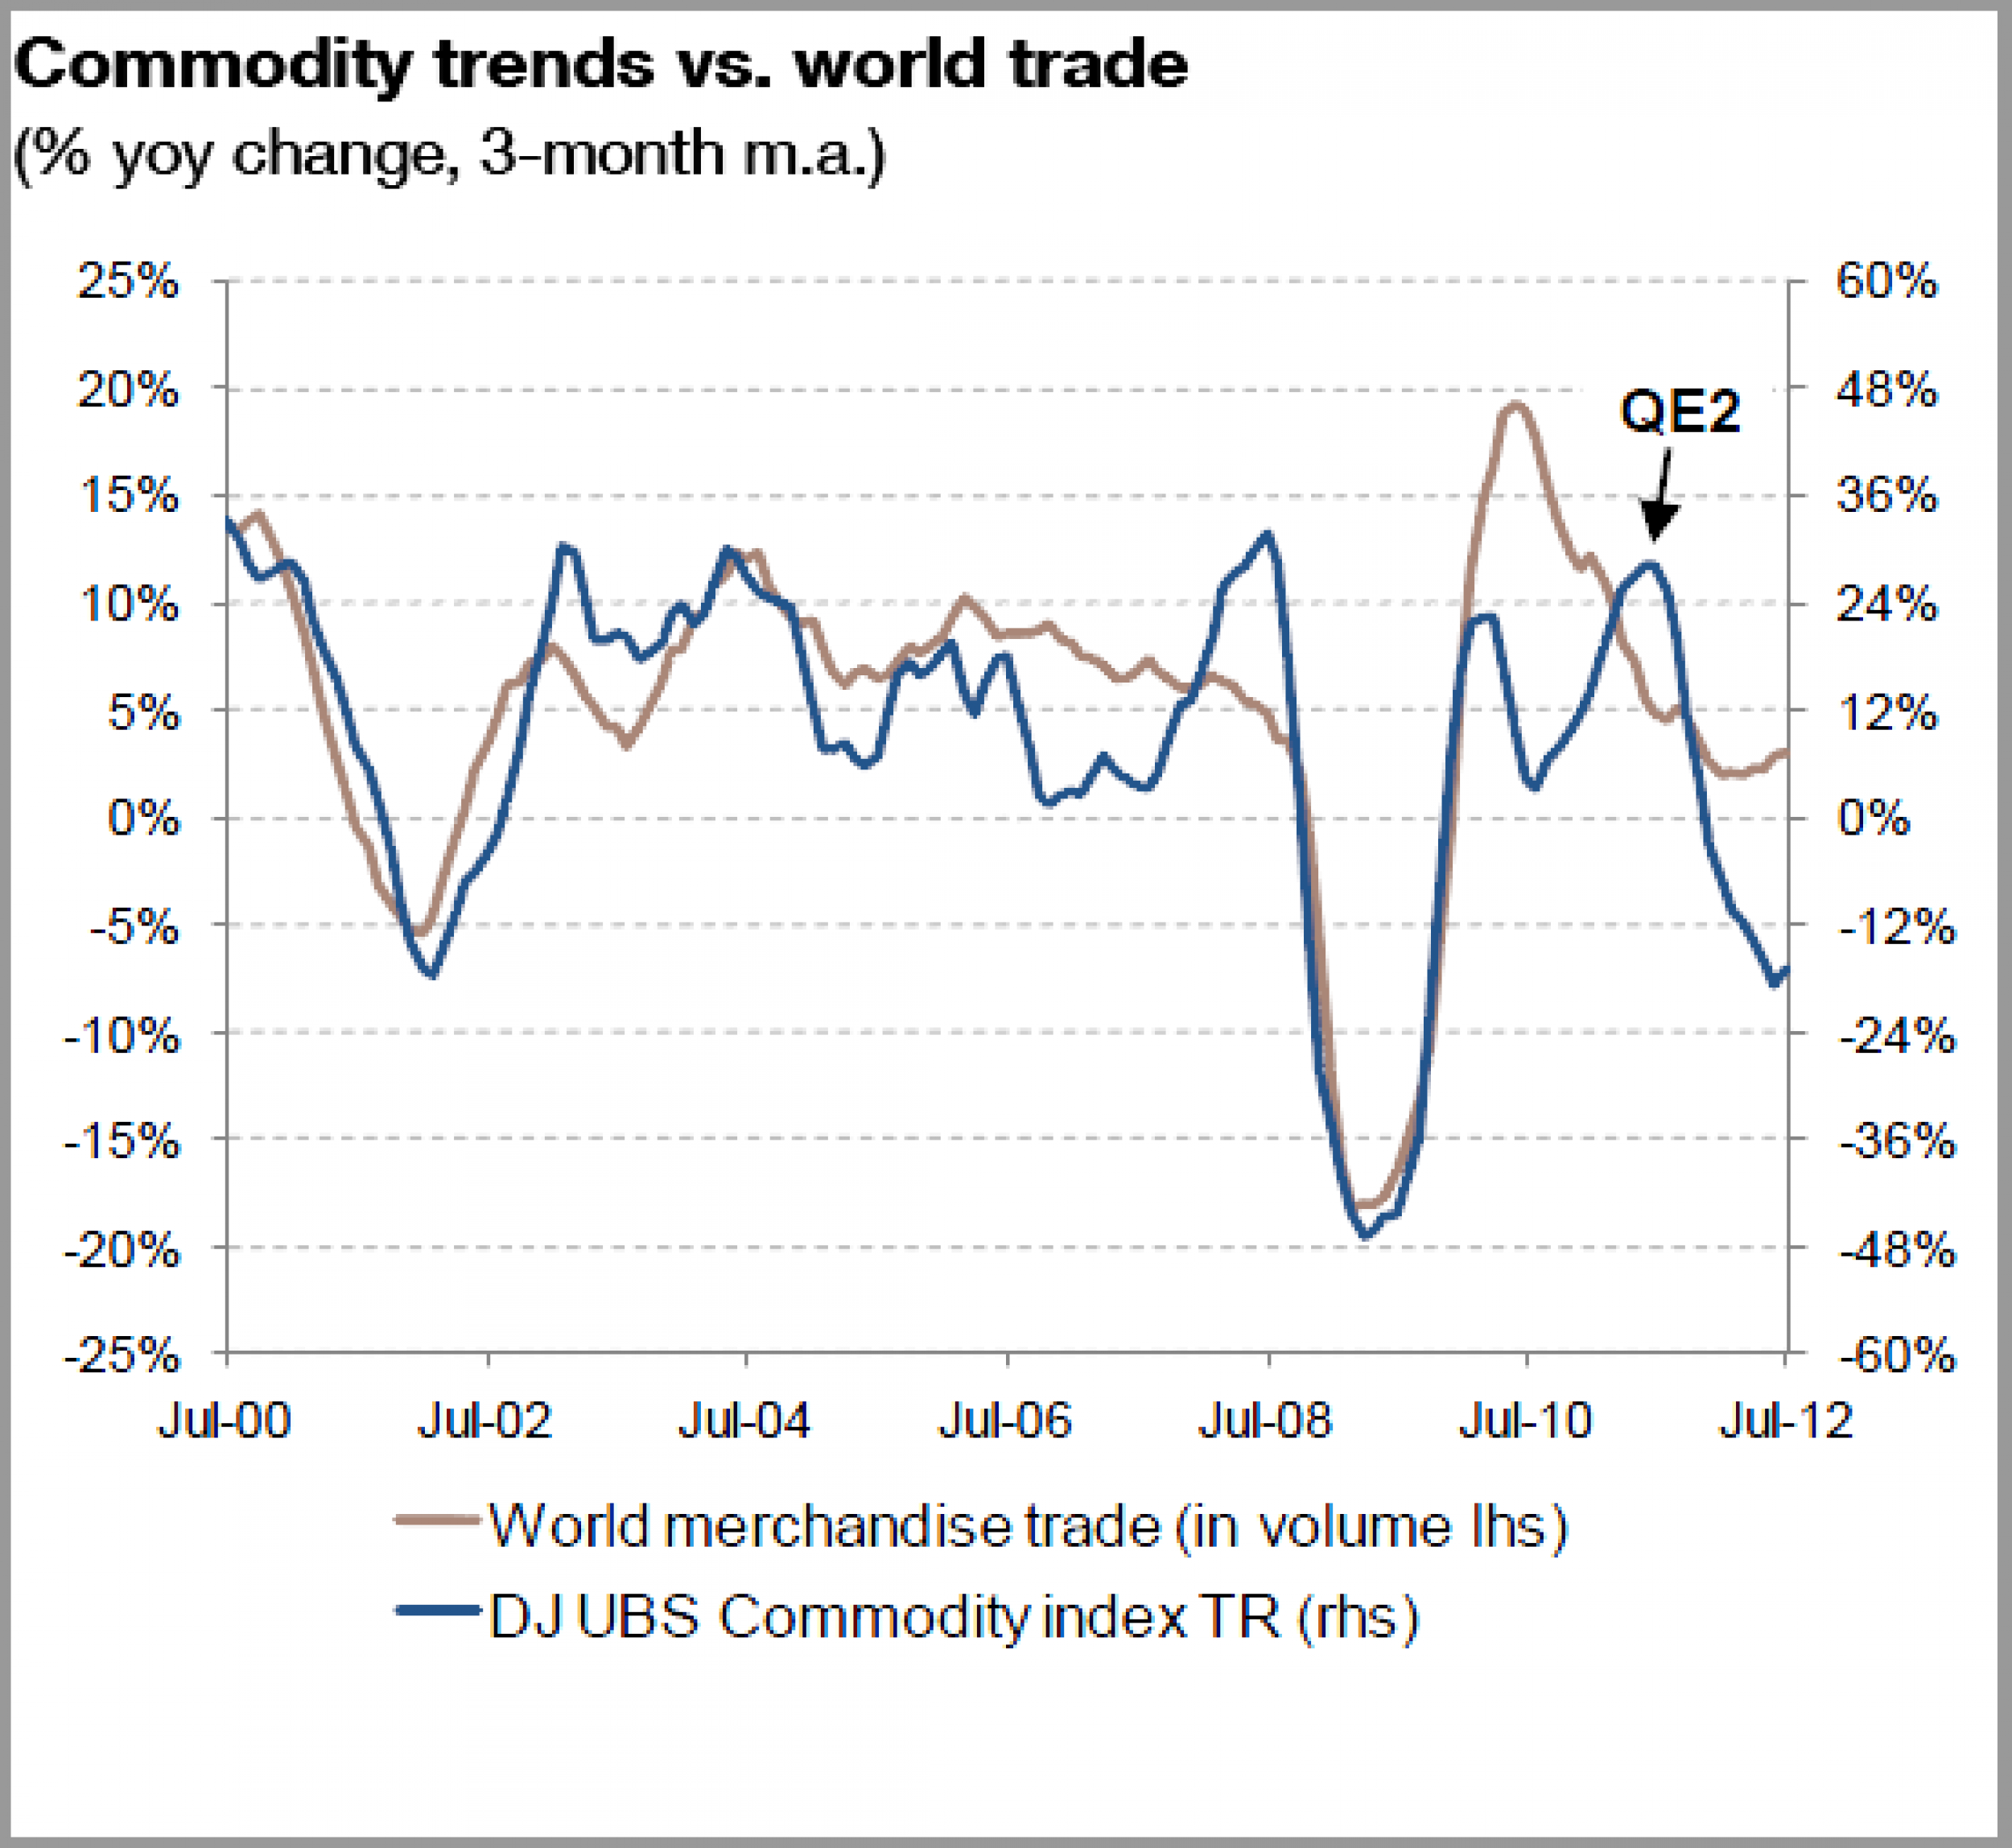 Oil, agricultural and industrial commodities